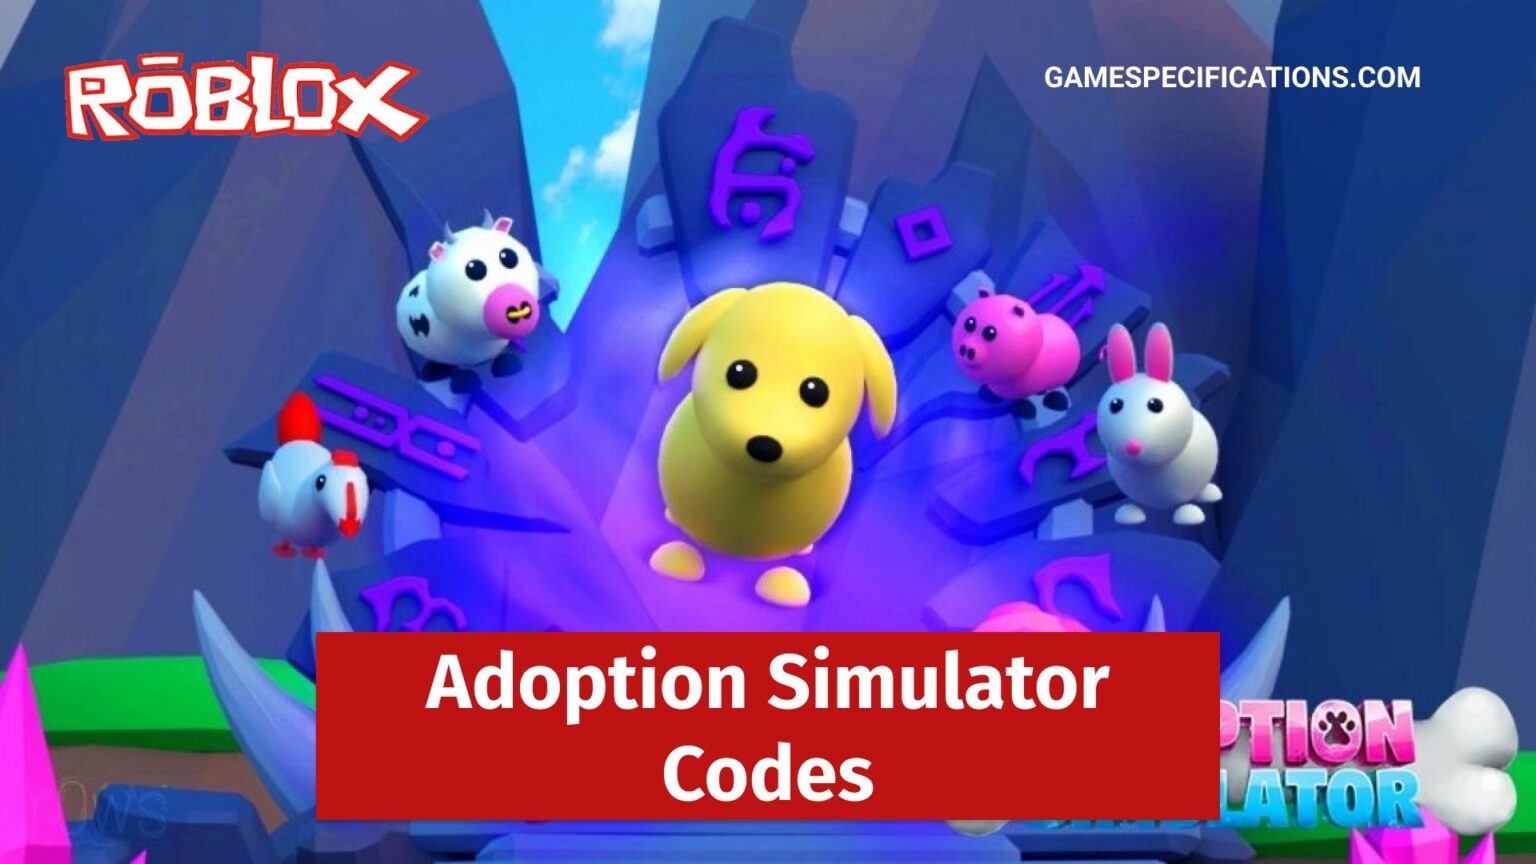 roblox-adoption-simulator-codes-july-2022-game-specifications